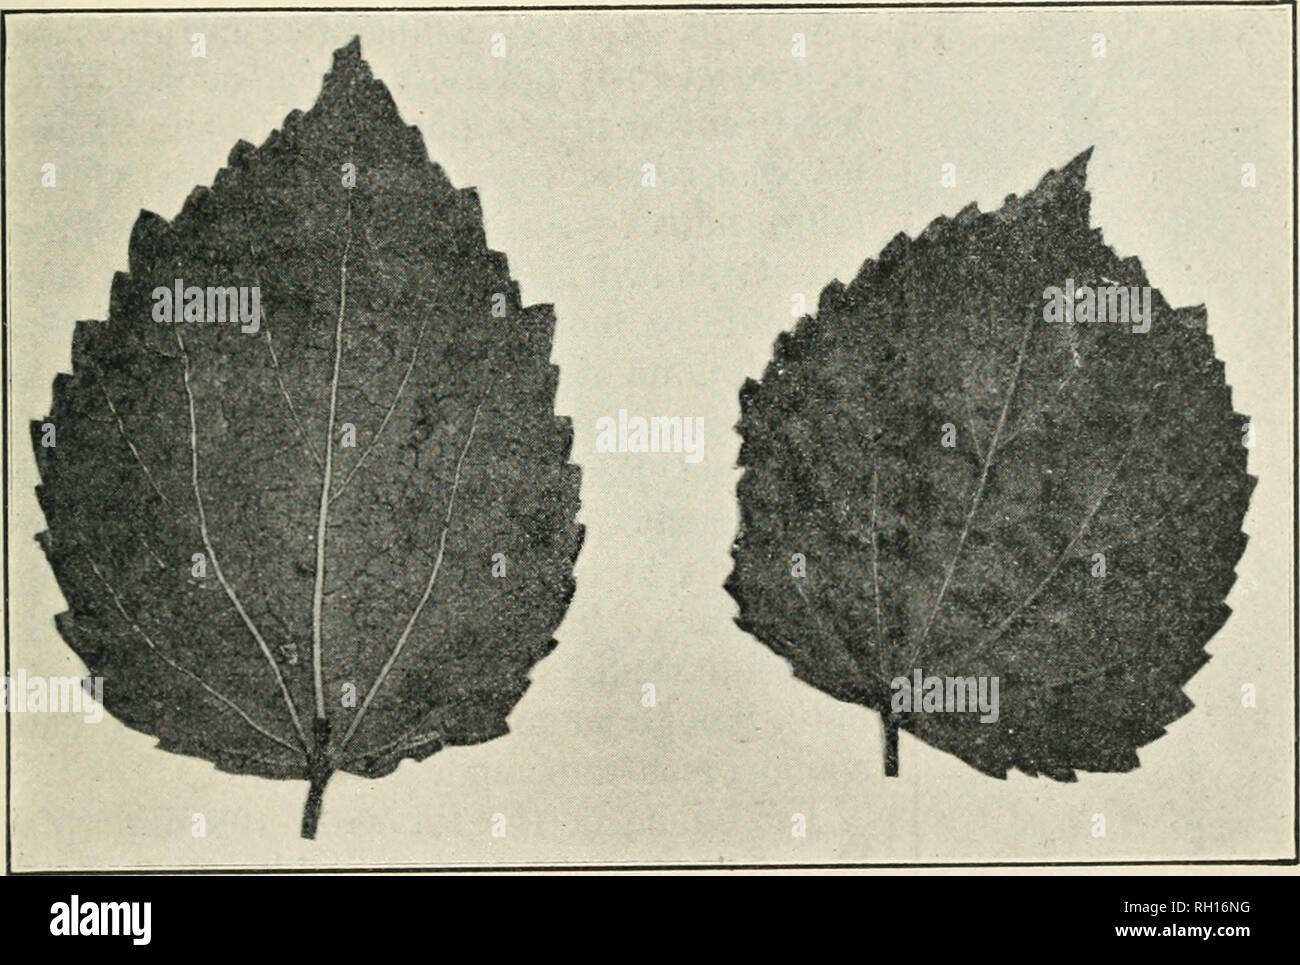 . Bulletin. Agriculture. LEAF FORMS OF VARIETIES OF HIBISCUS CANNABINUS. 15 been found on the Egyptian cotton in Arizona as low as the seventh node, as reported by Mr. Argyle ]McLachhin. LEAF FORMS OF VARIETIES OF HIBISCUS CANNABINUS. At least two varieties of the Dcccan hemp are grown in Kgypt, one with deei)ly divided, finely tootlied leaves (Pis. I and II) and the other with more coarsely toothed, undivided leaves (figs. 1,2, 3, and 4). It does not appear that cither of these Egyptian varieties has been introduced into the United States, but a third variety wdth digitately parted leaf blade Stock Photo